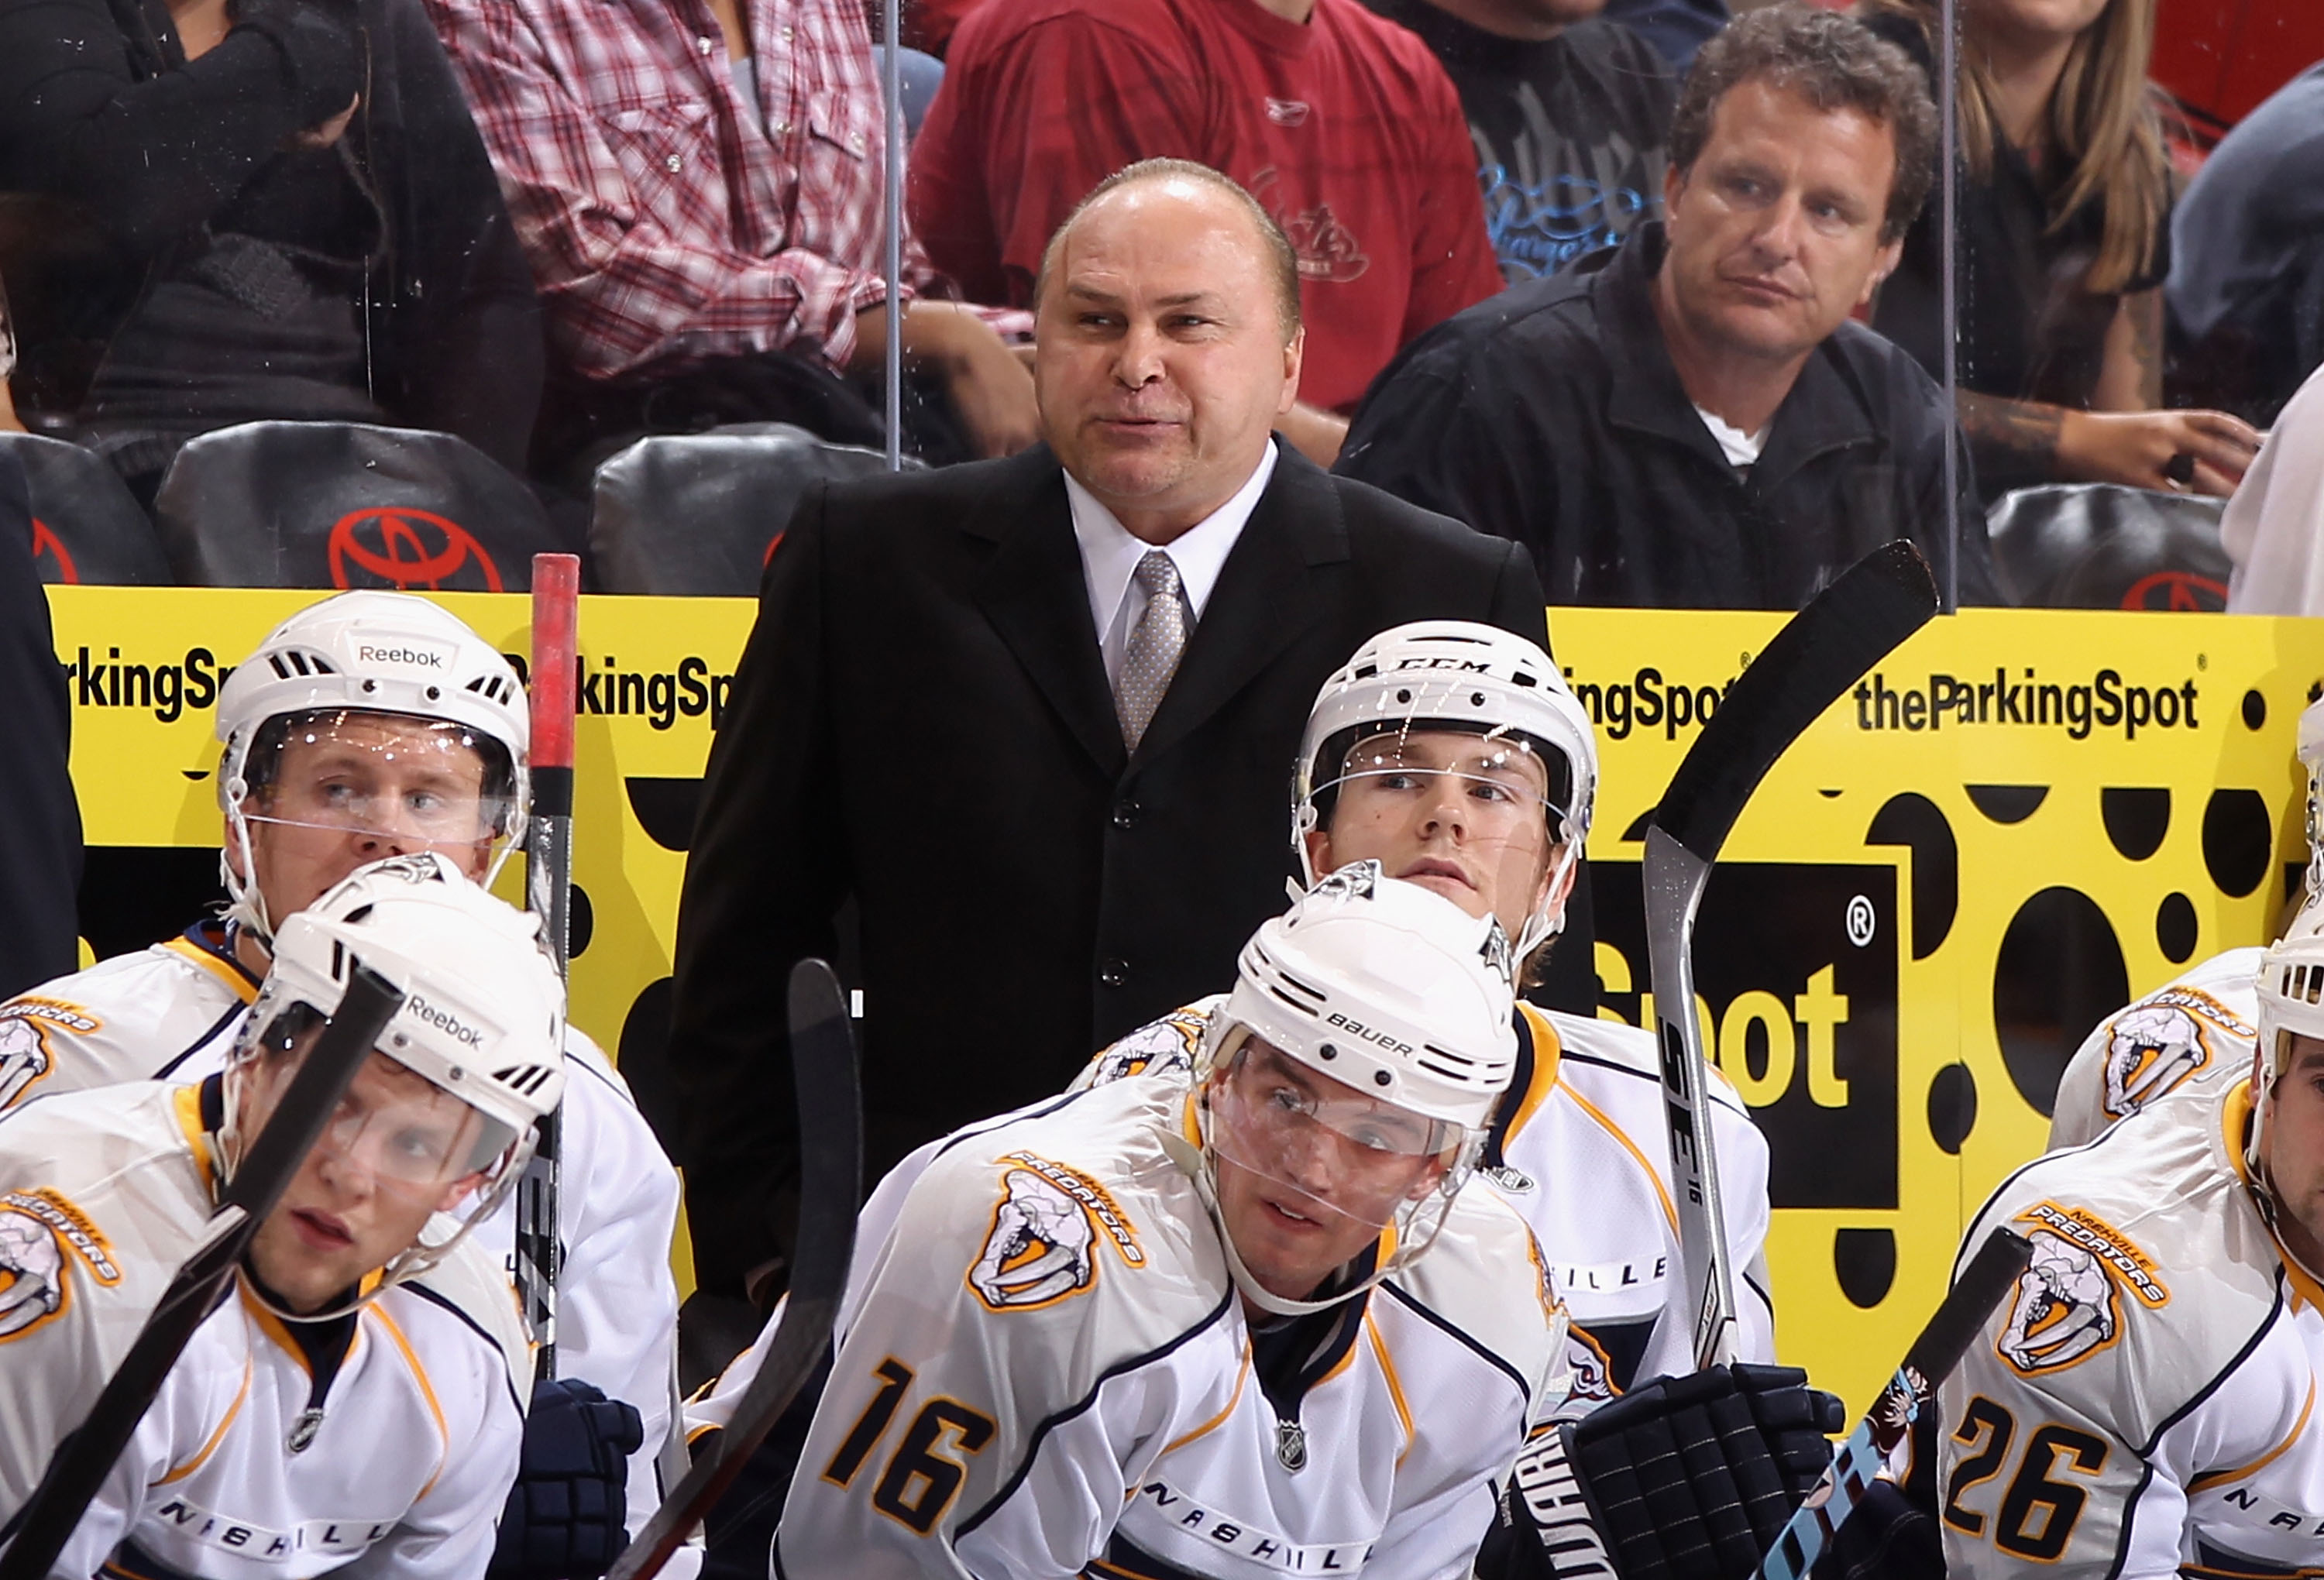 GLENDALE, AZ - NOVEMBER 03:  Head coach Barry Trotz of the Nashville Predators during the NHL game against the Phoenix Coyotes at Jobing.com Arena on November 3, 2010 in Glendale, Arizona.  The Coyotes defeated the Predators 4-3.  (Photo by Christian Pete